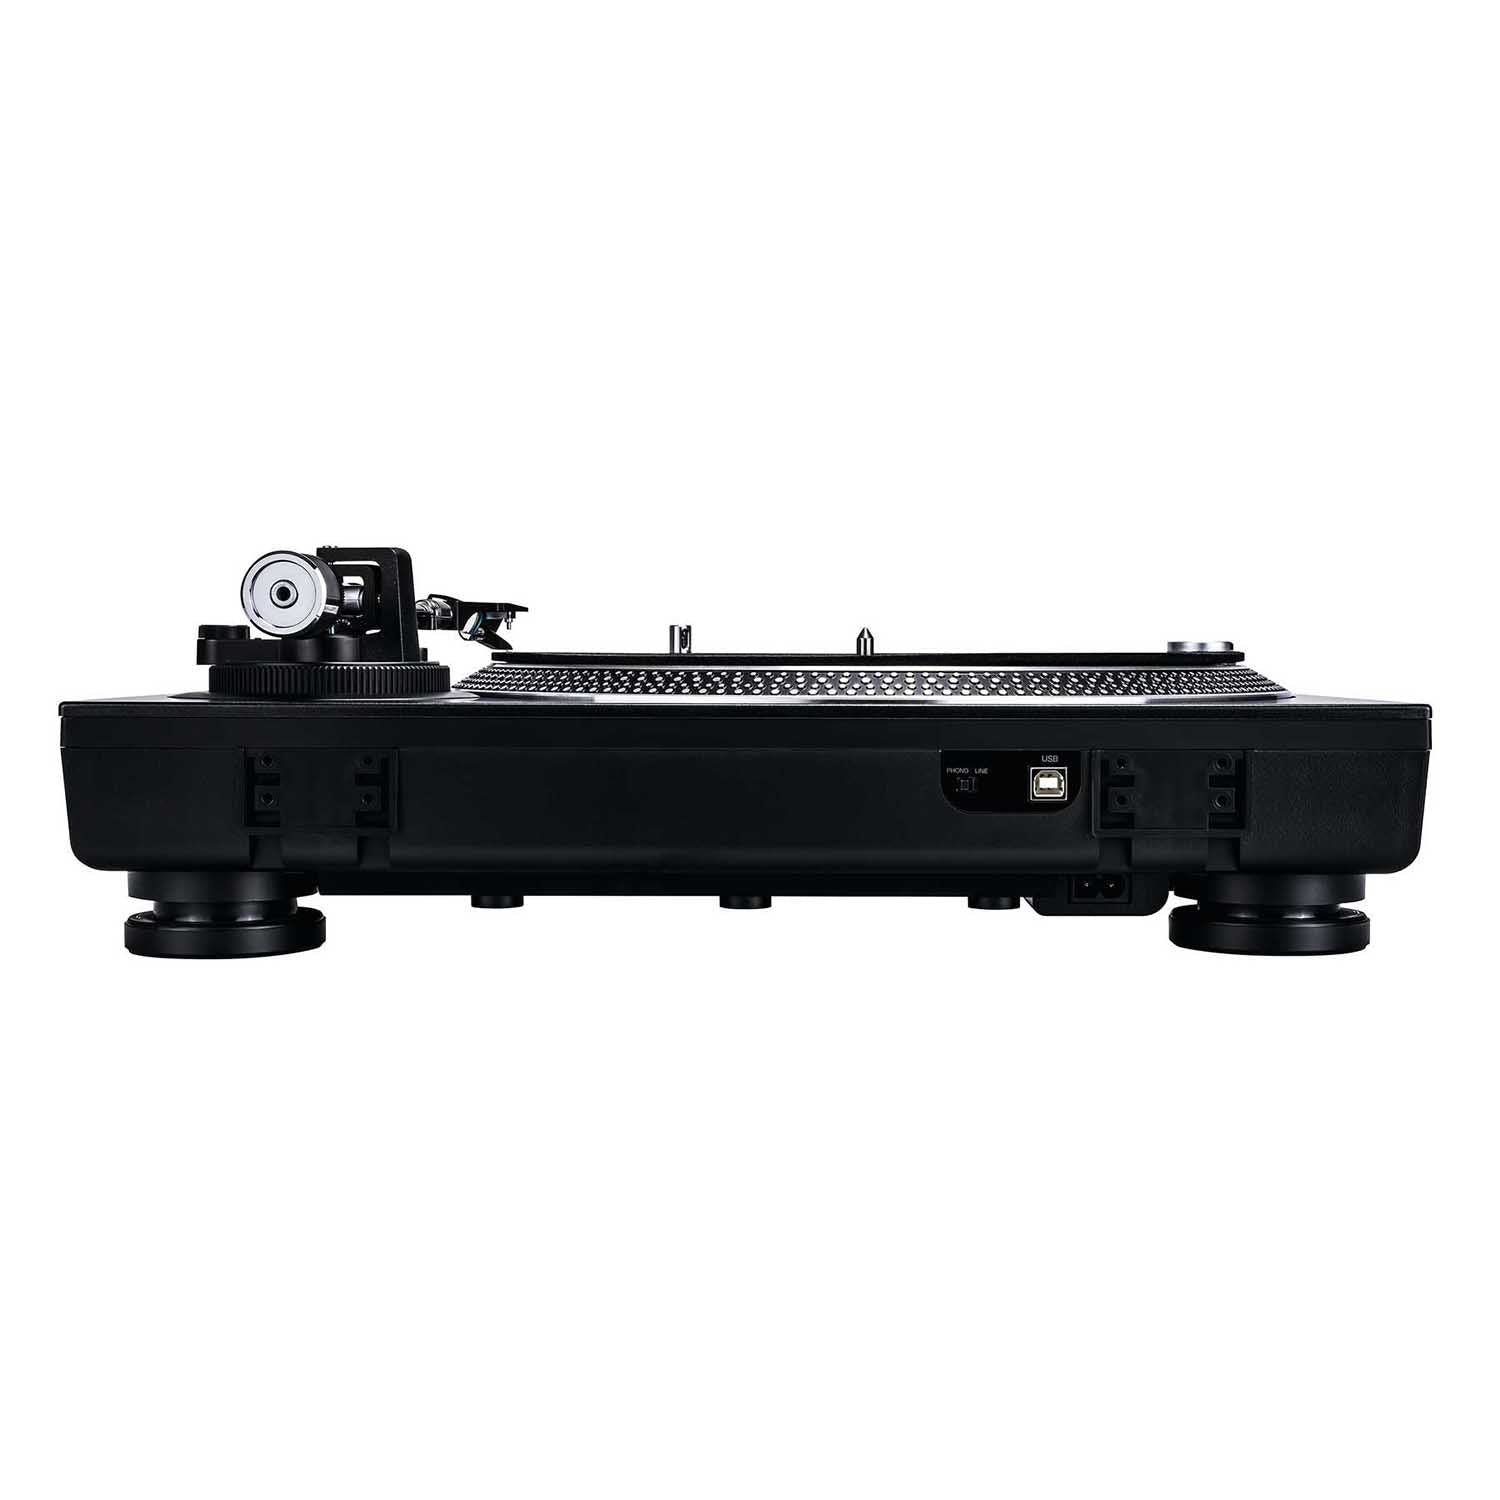 Discontinued: Reloop RP-2000-USB-MK2, Professional Direct Drive USB Turntable System - Hollywood DJ